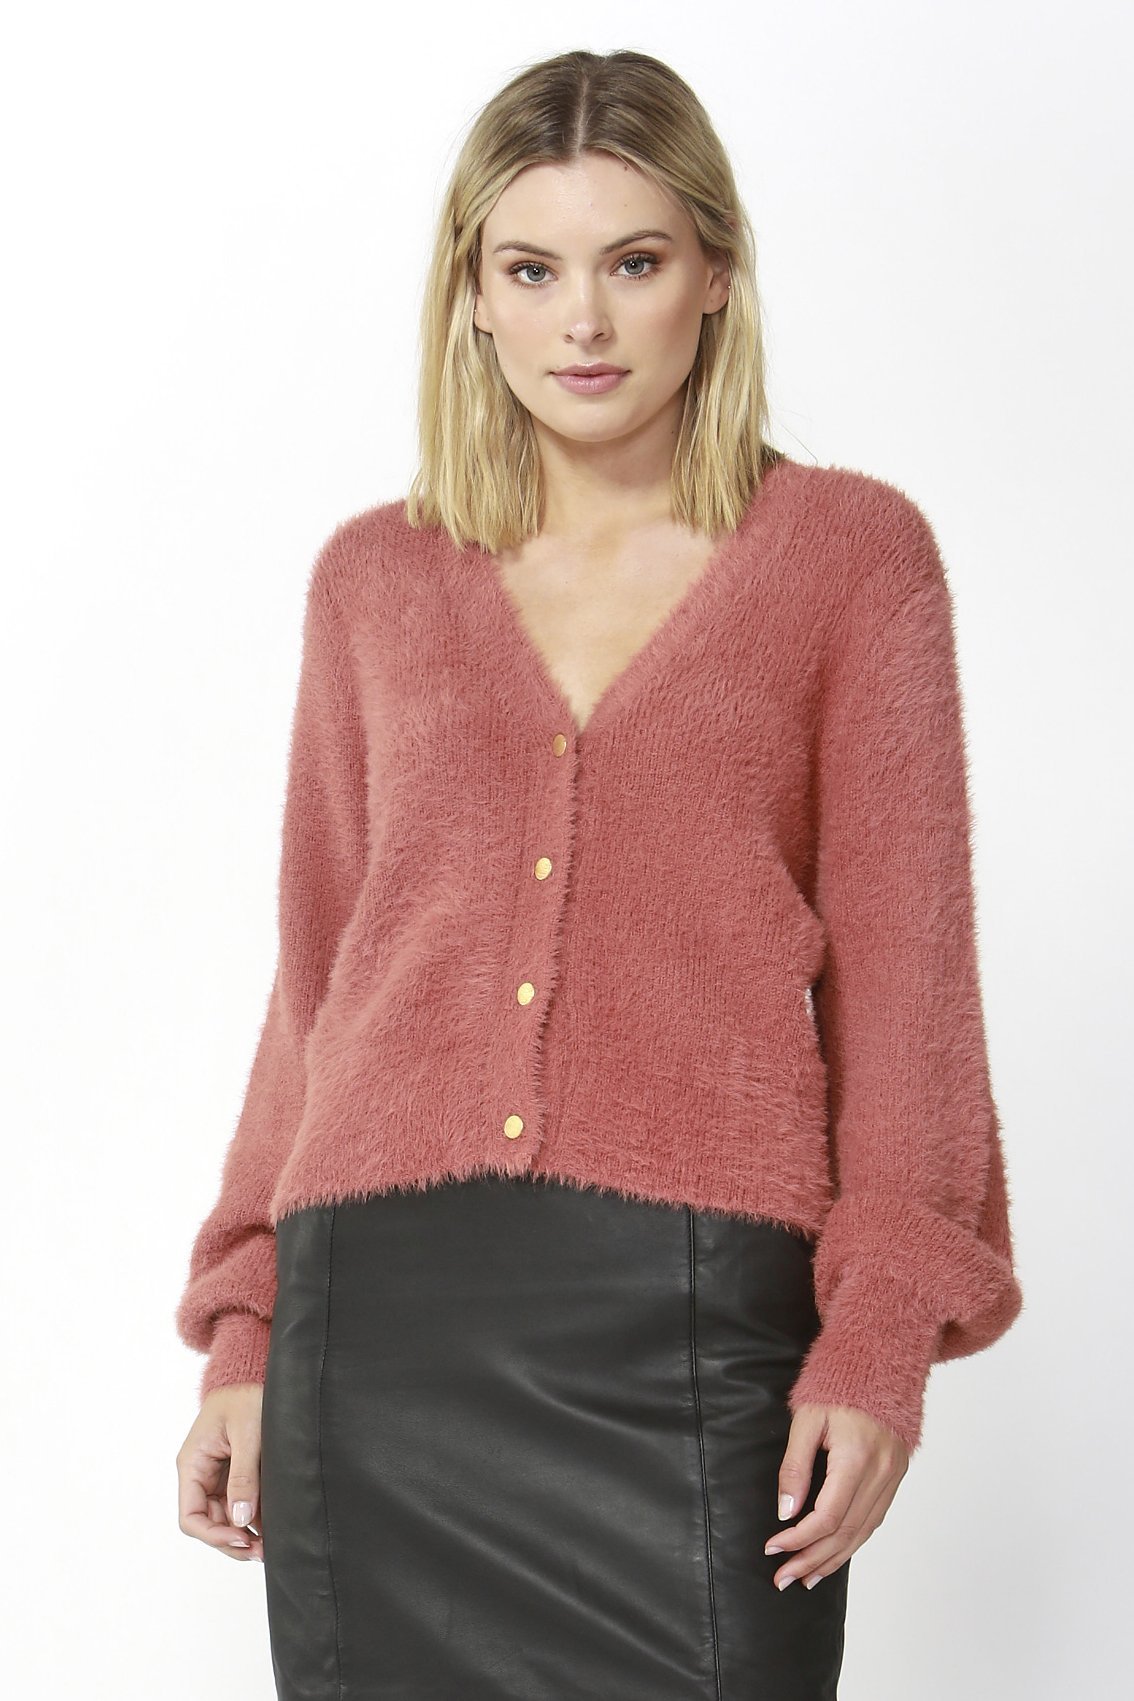 Fate + Becker Ashbury Cardigan in Rose Size 16 ONLY - Hey Sara